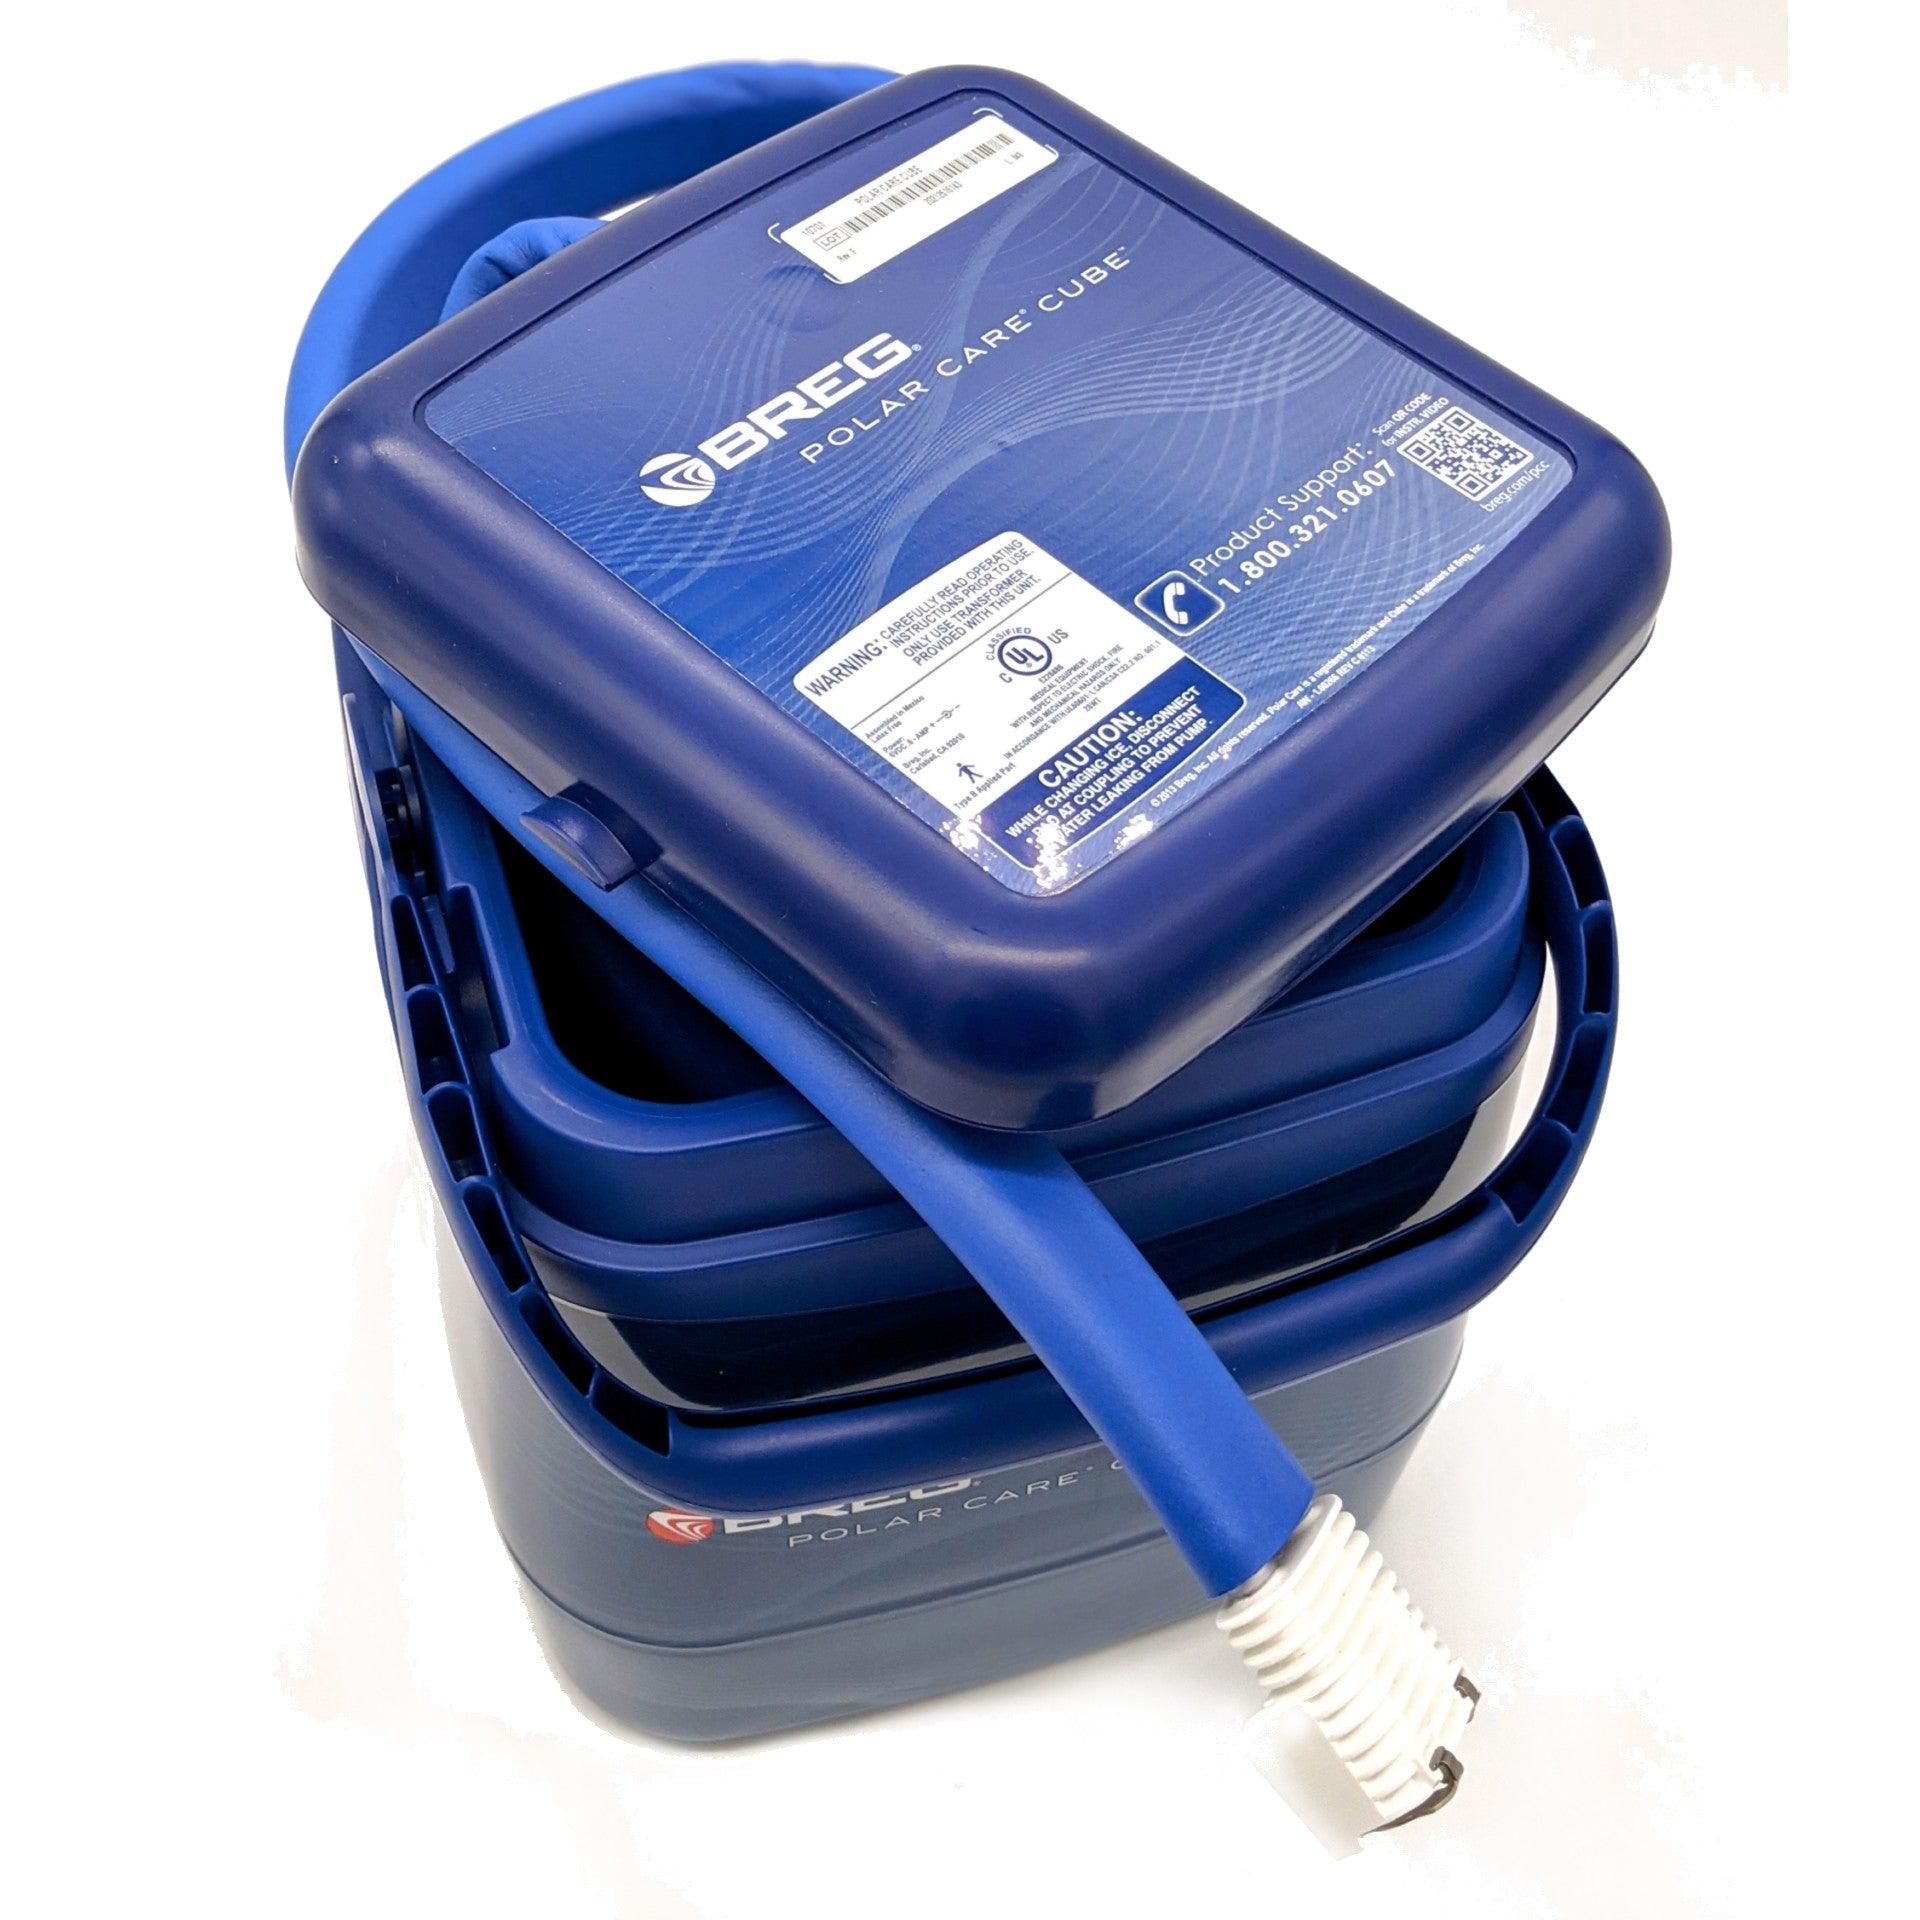 Breg® Polar Care Cube (Cooler Only) - 10701 Breg® Polar Care Cube (Cooler Only) - undefined by Supply Physical Therapy Breg, Cold Therapy Units, Cooler Only, Cube, Polar Care